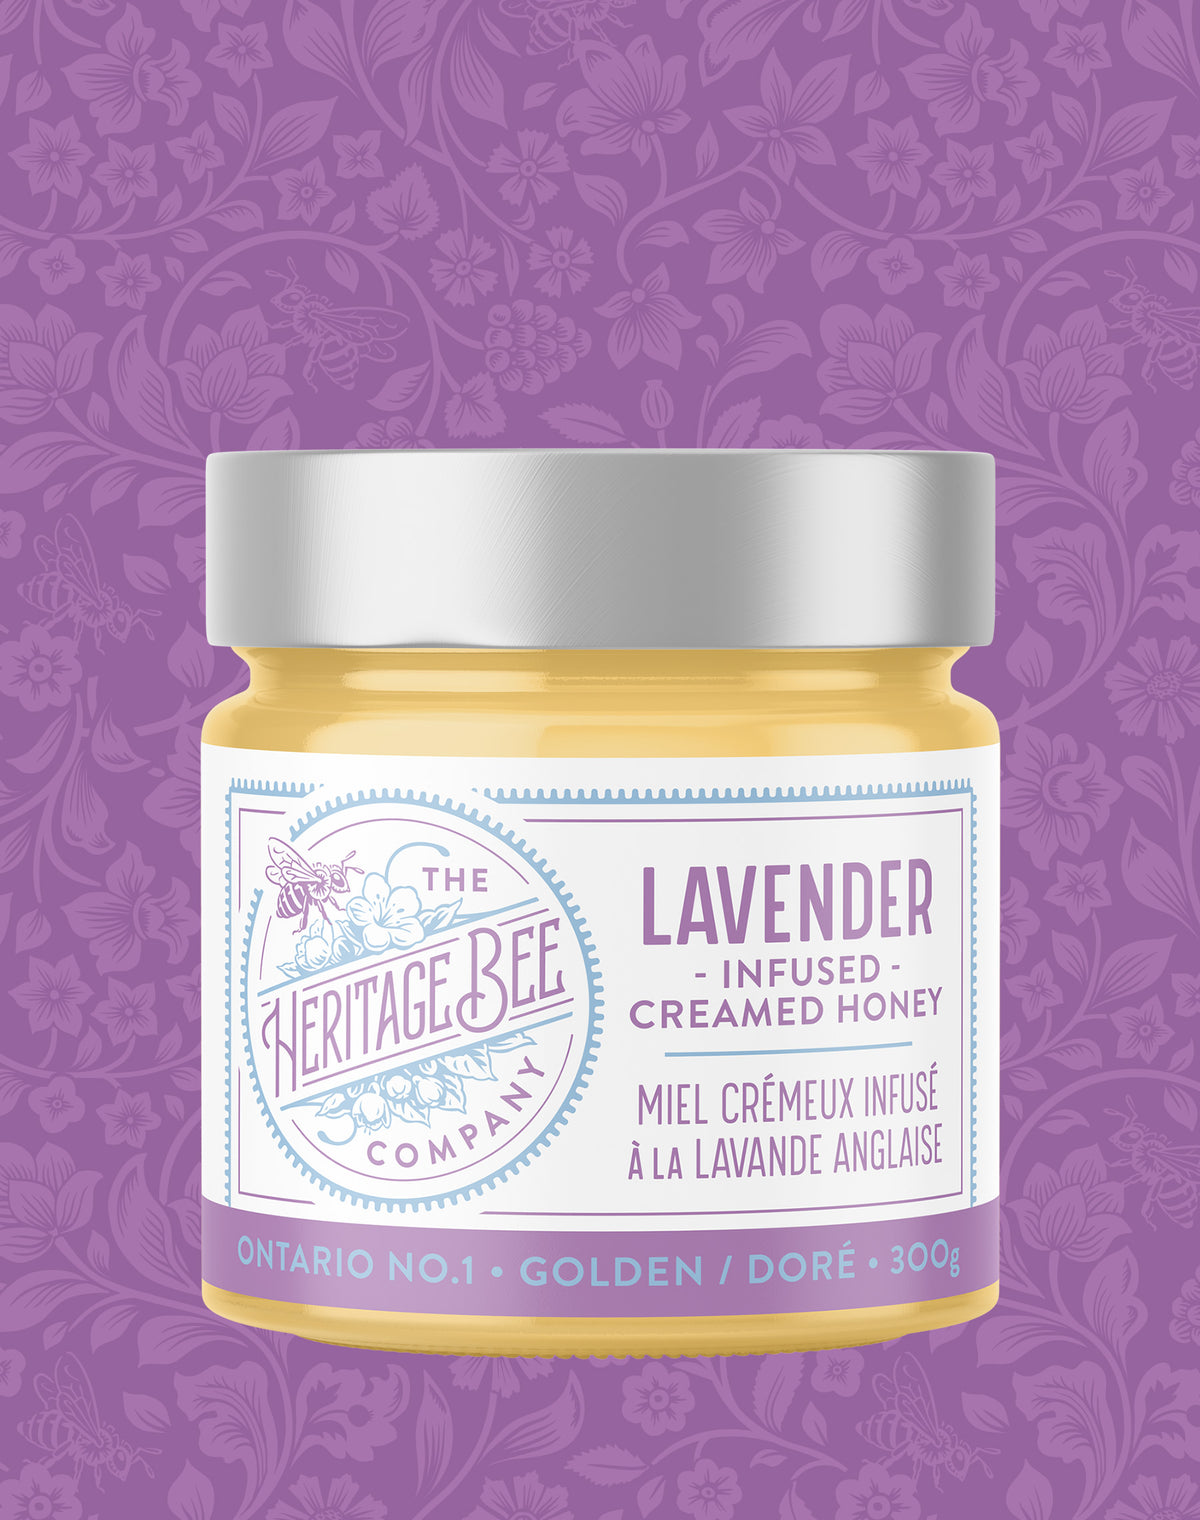 English lavender infused creamed wildflower honey made locally in Ontario, with light earthy floral undertones. Handcrafted gourmet honey made by the Heritage Bee Co.